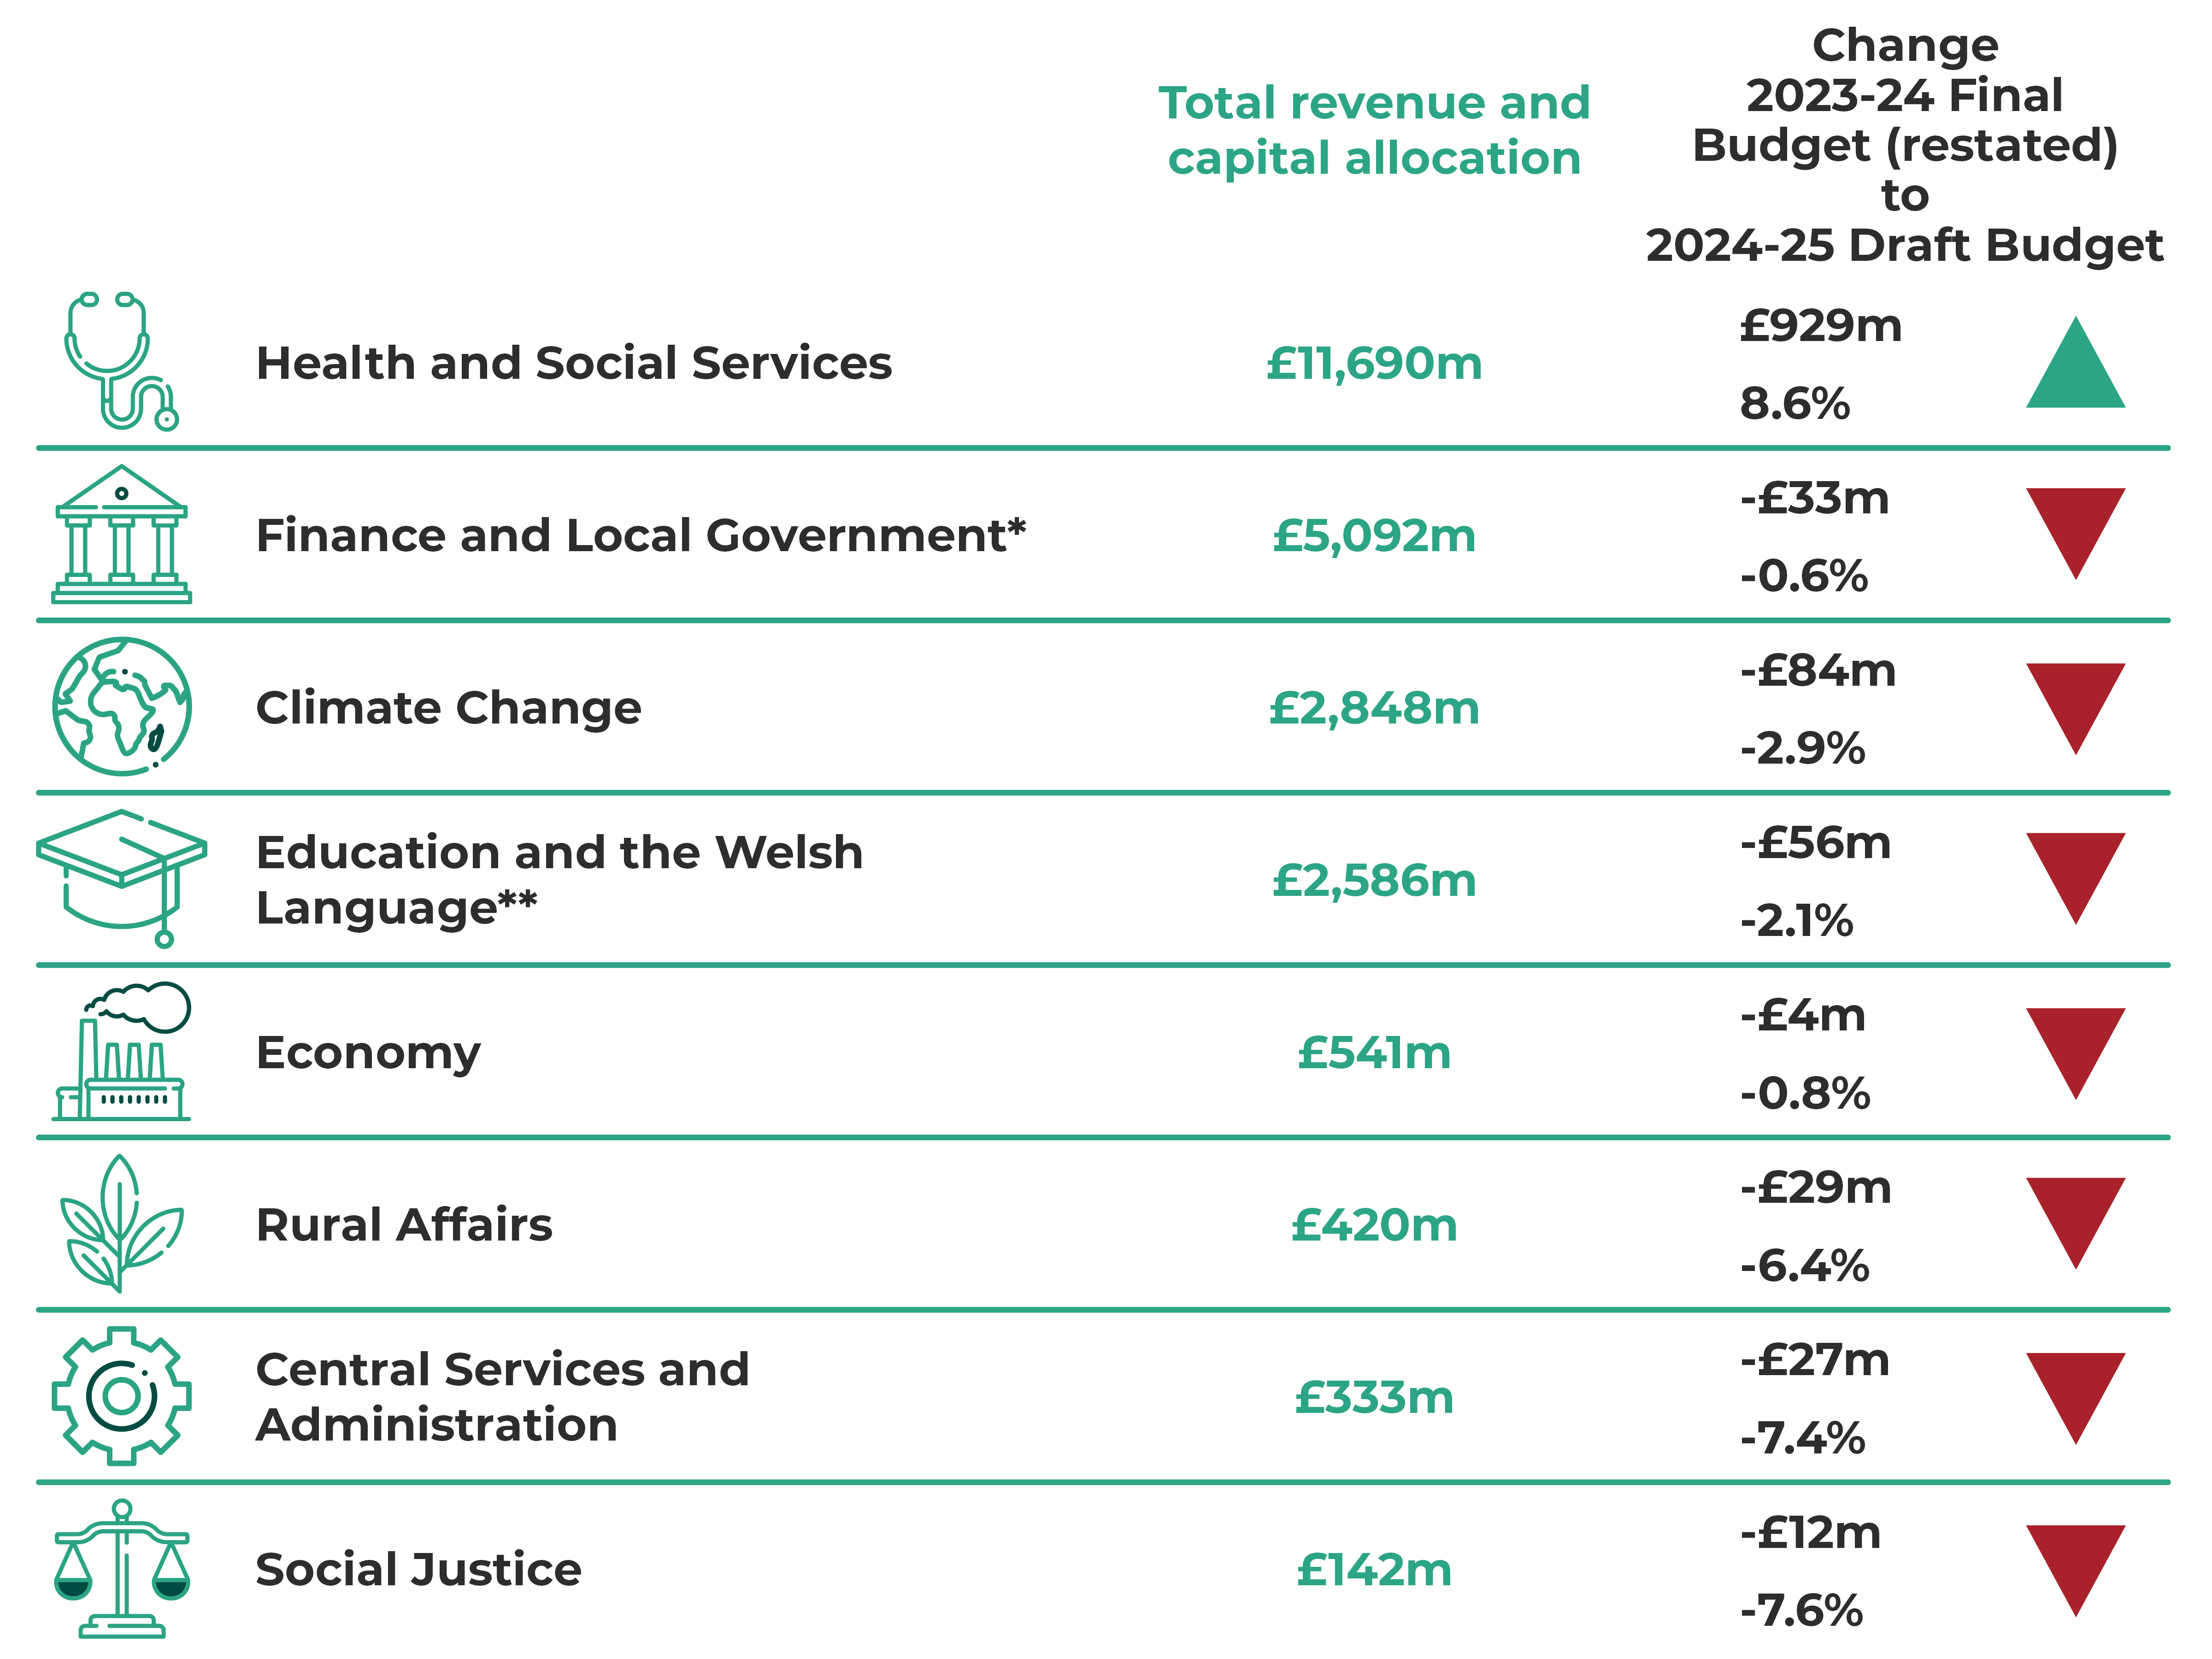 Health and Social Services £11,690m, up £929m (8.6%). Finance and Local Government £5,092m, down £33m (-0.6%). Climate Change £2,848m, down £84m (-2.9%). Education and the Welsh Language £2,586m, down £56m (-2.1%). Economy £541m, down £4m (-0.8%). Rural Affairs £420m, down £29m (-6.4%). Central Services and Administration £333m, down £27m (-7.4%). Social Justice £142m, down £12m (-7.6%).